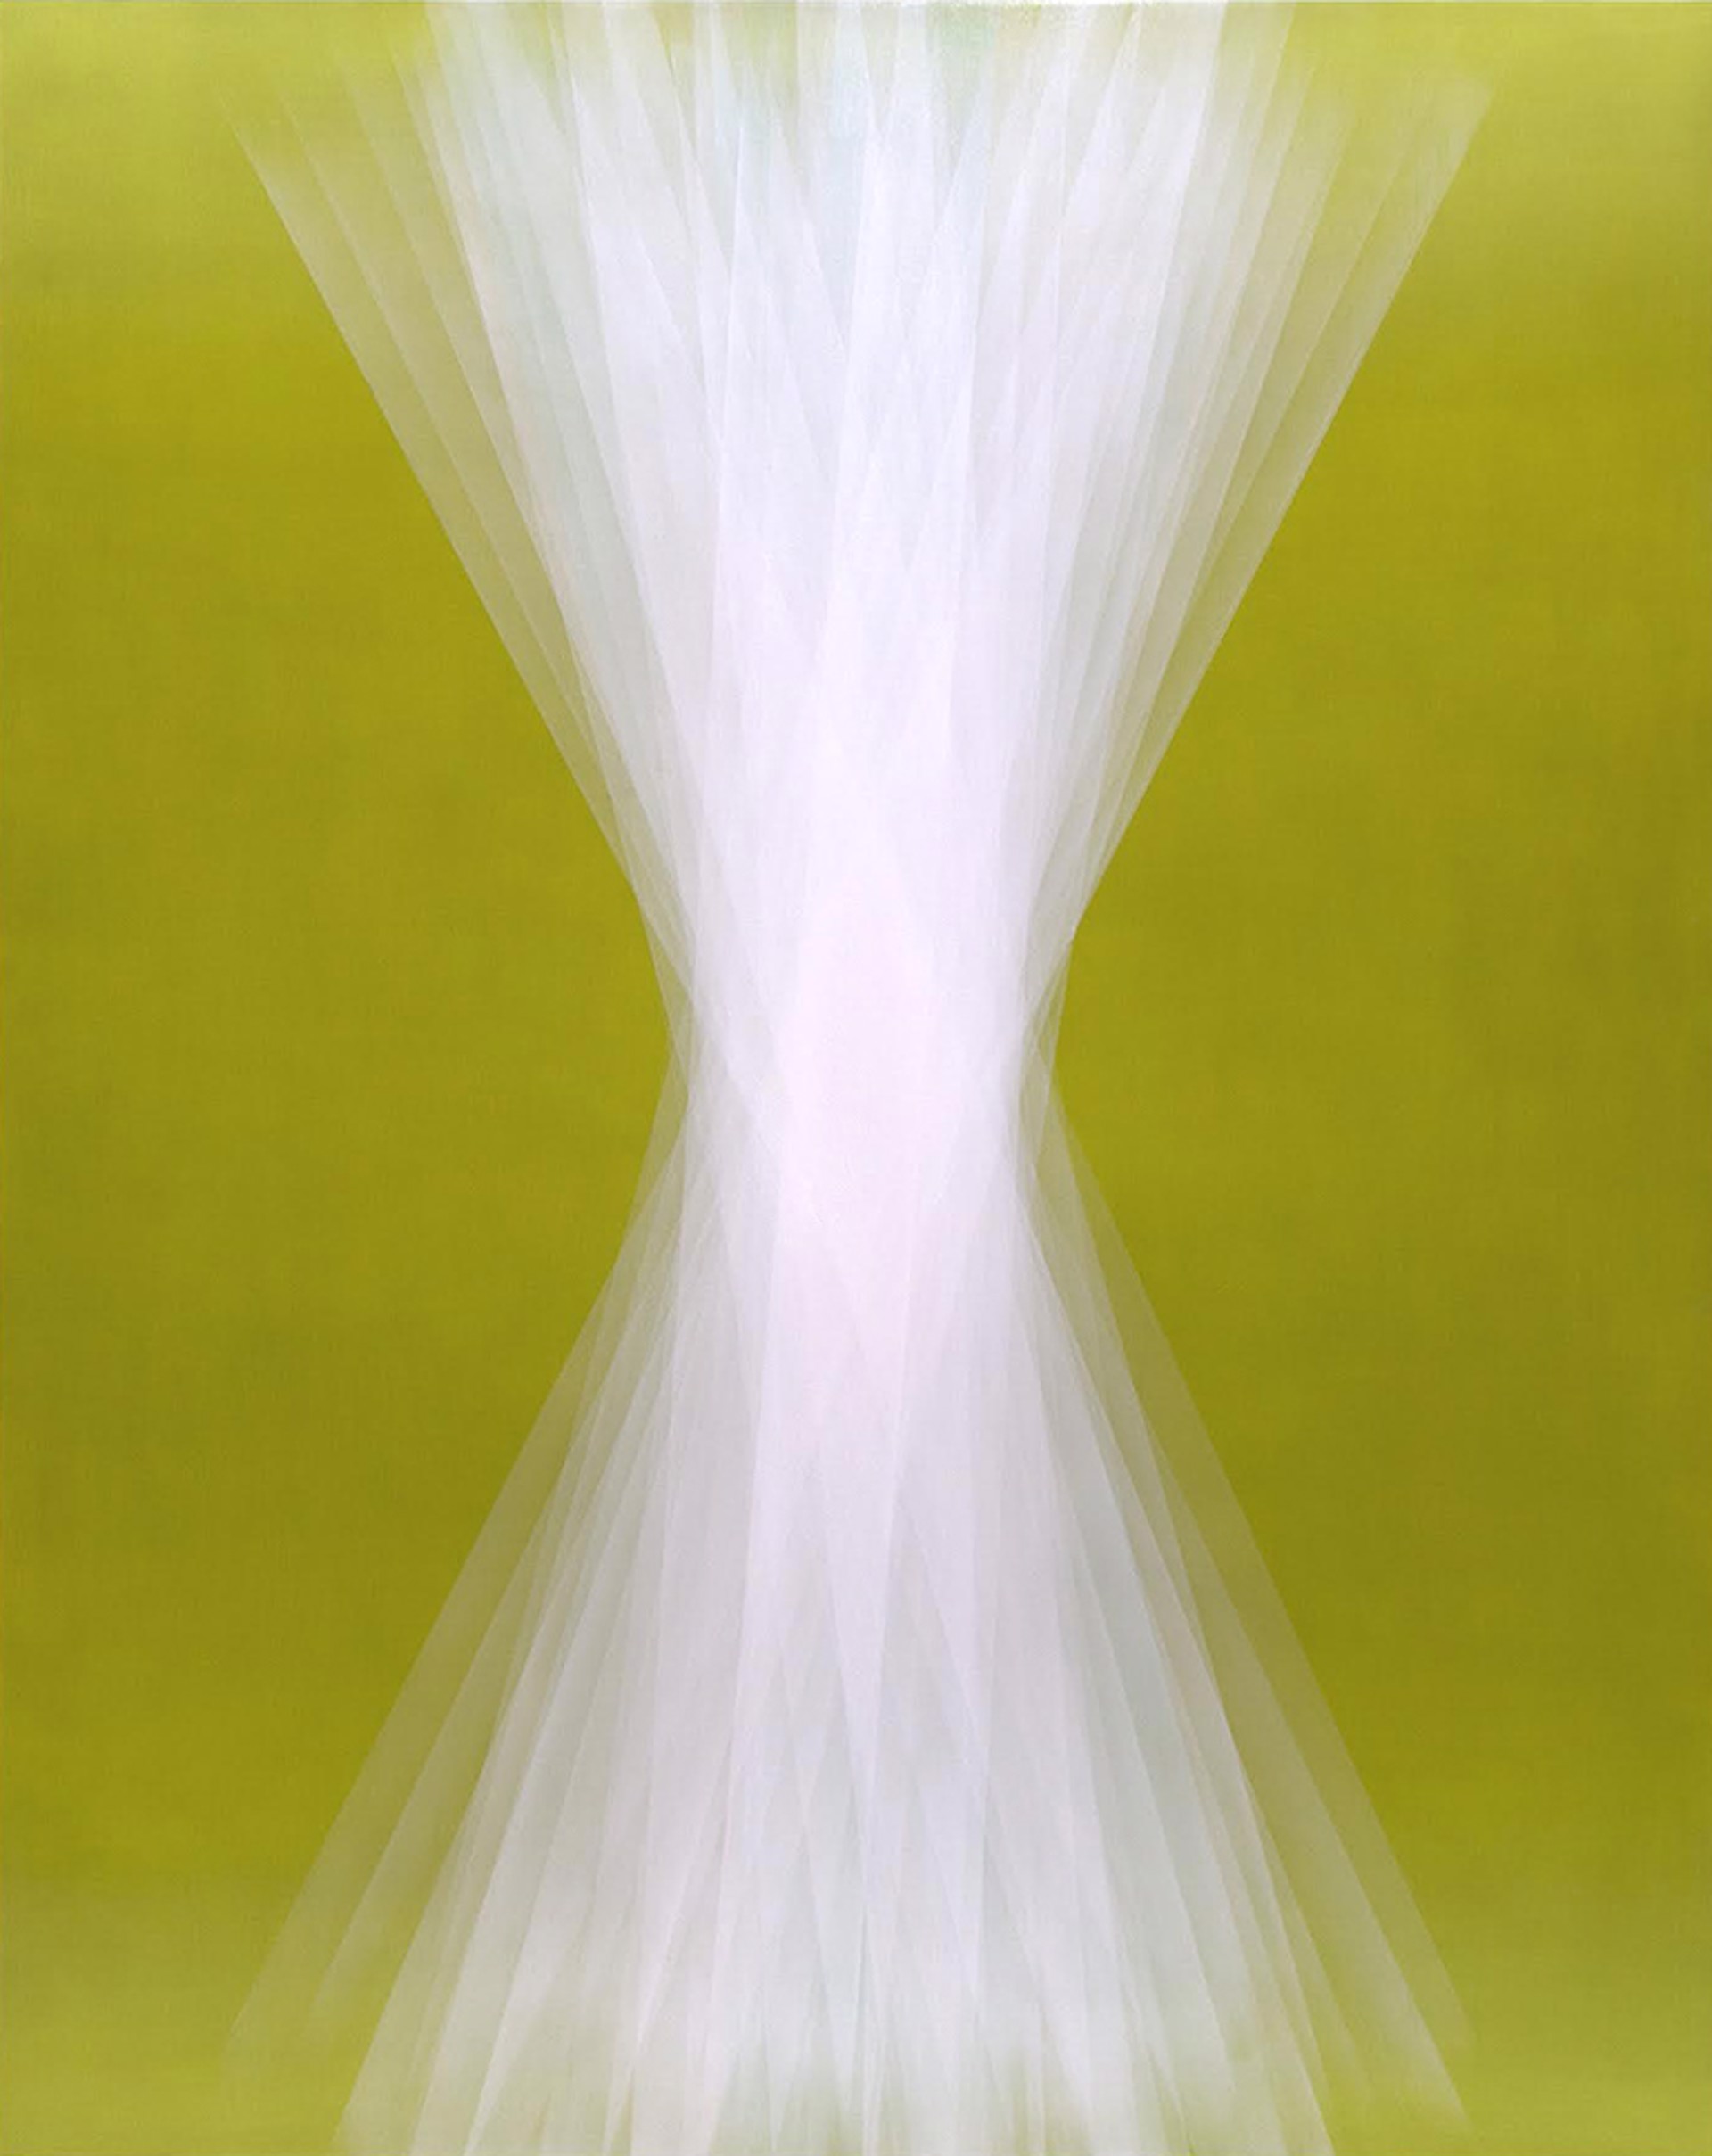 Spaces in Between (Chartreuse Yellow) by Bernadette Jiyong Frank